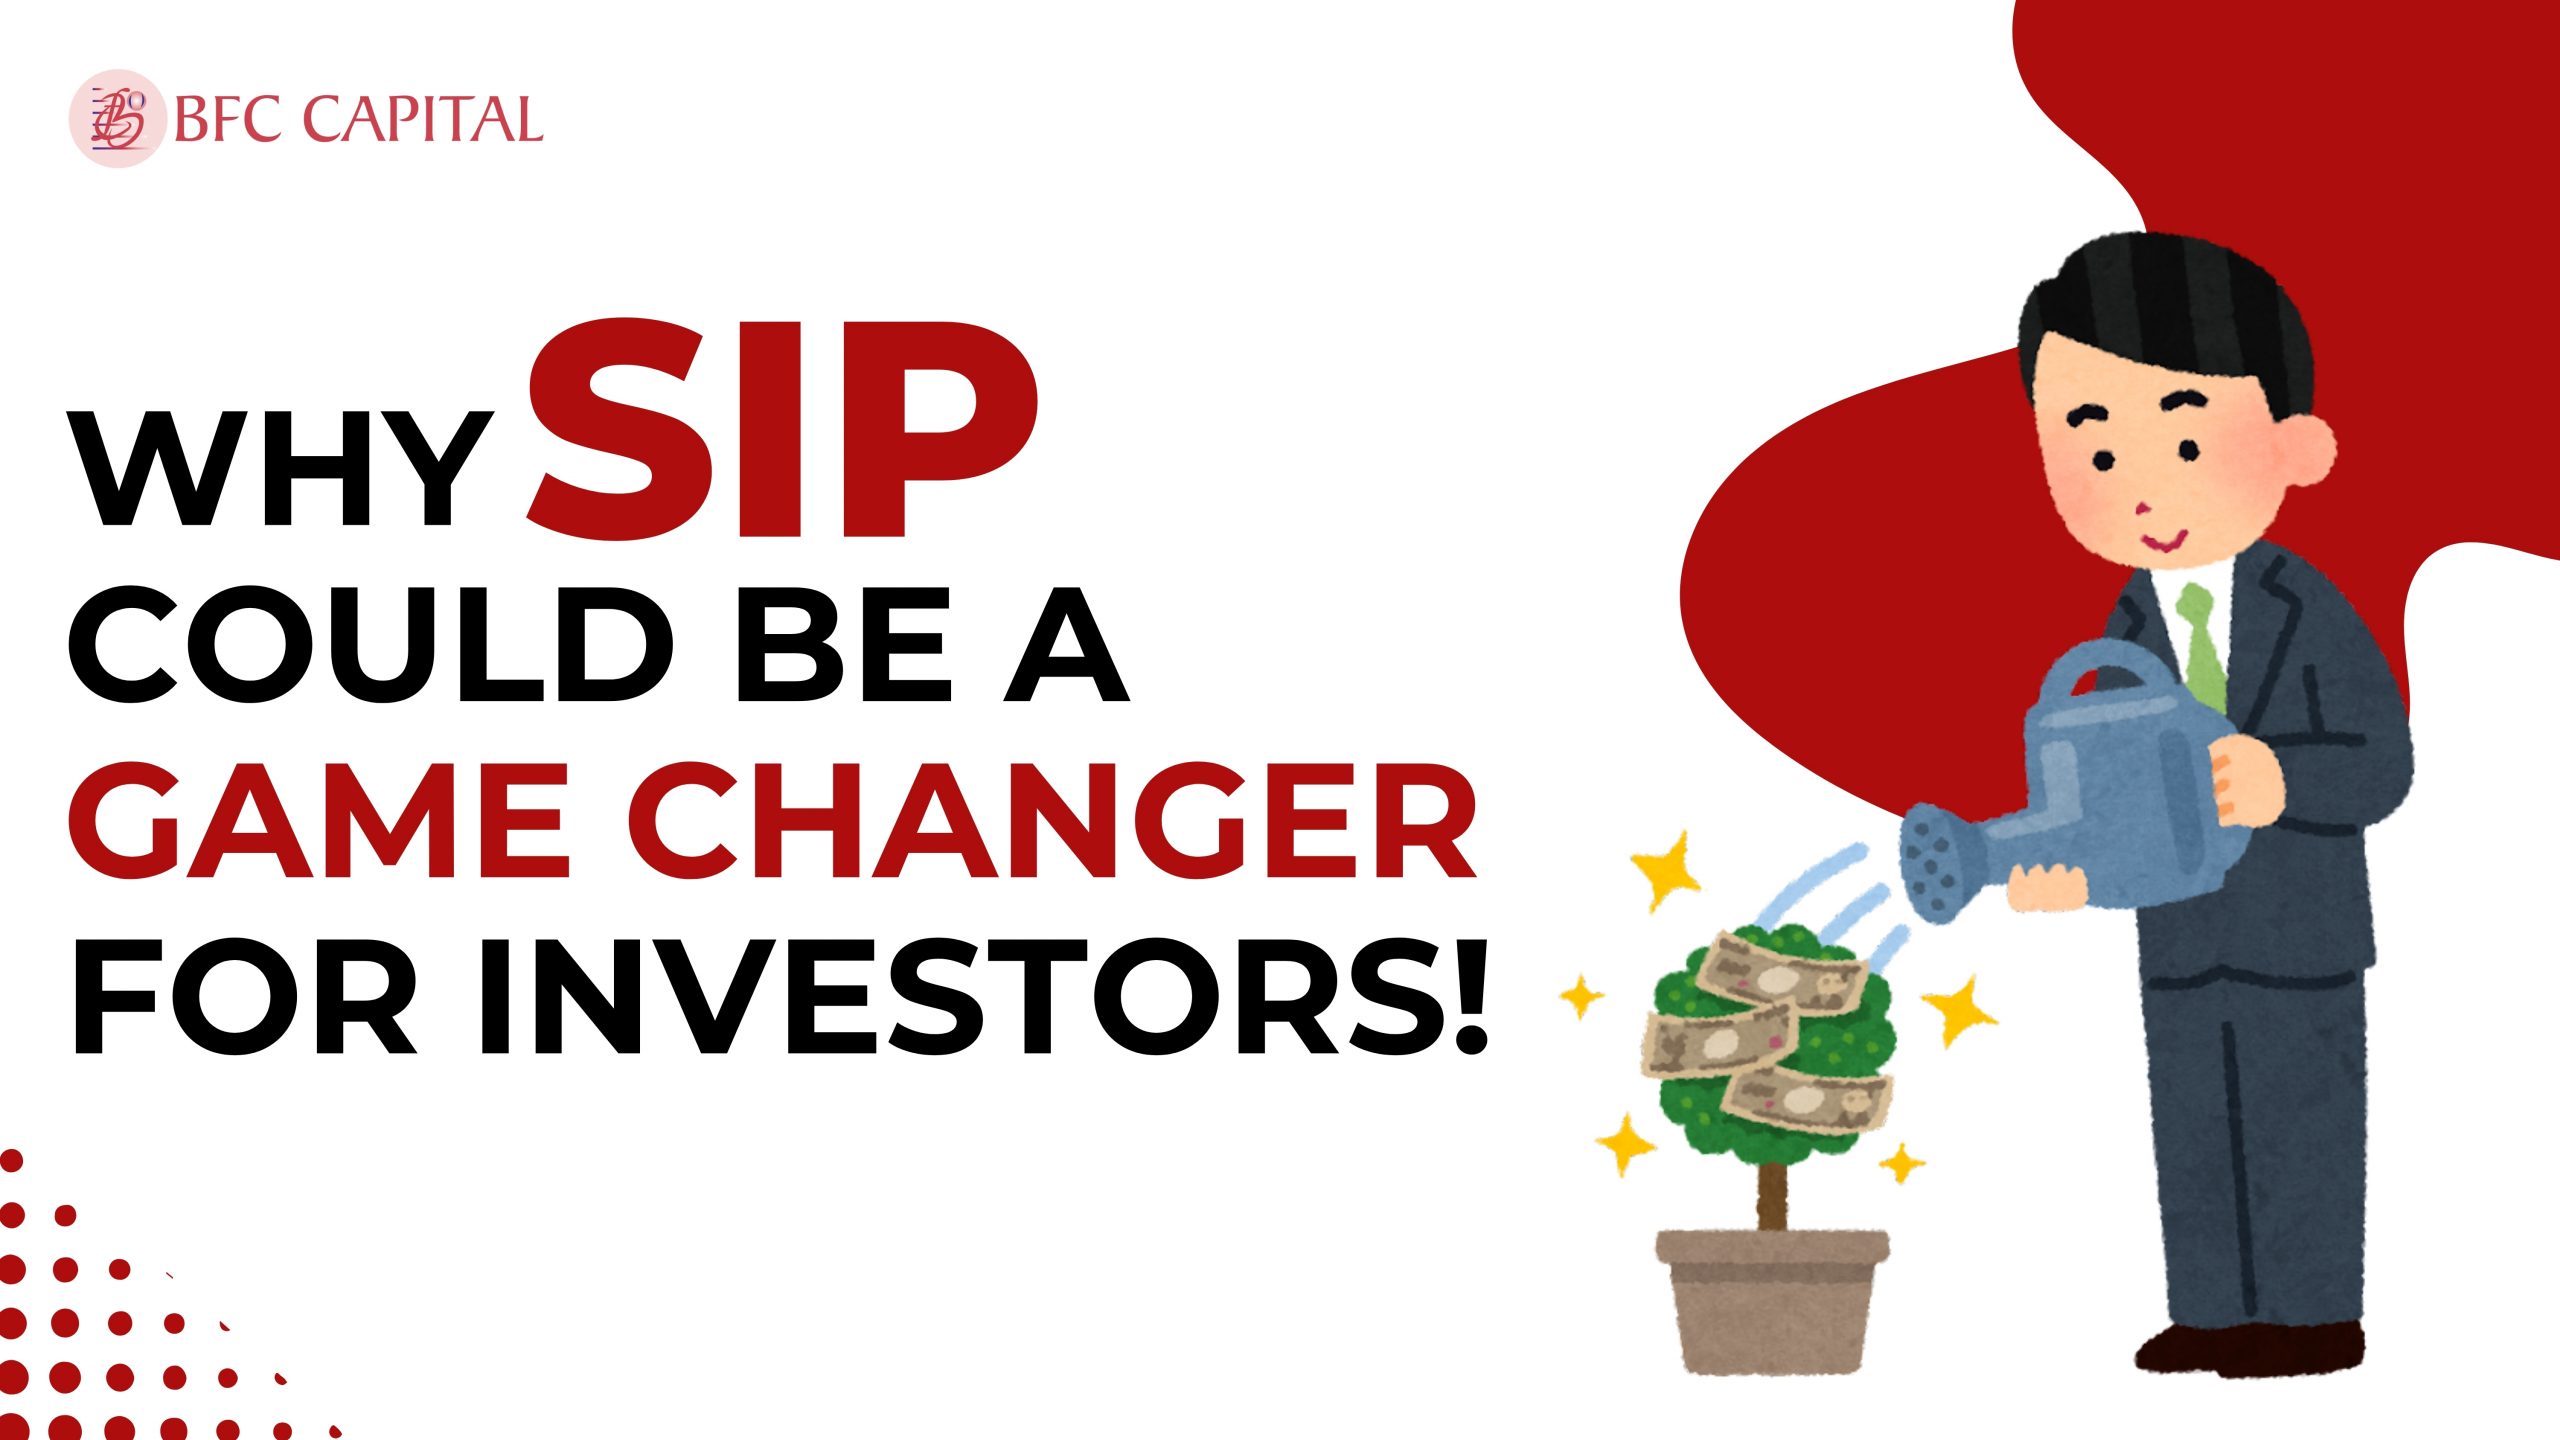 WHY SIP COULD BE A GAME CHANGER FOR INVESTORS!